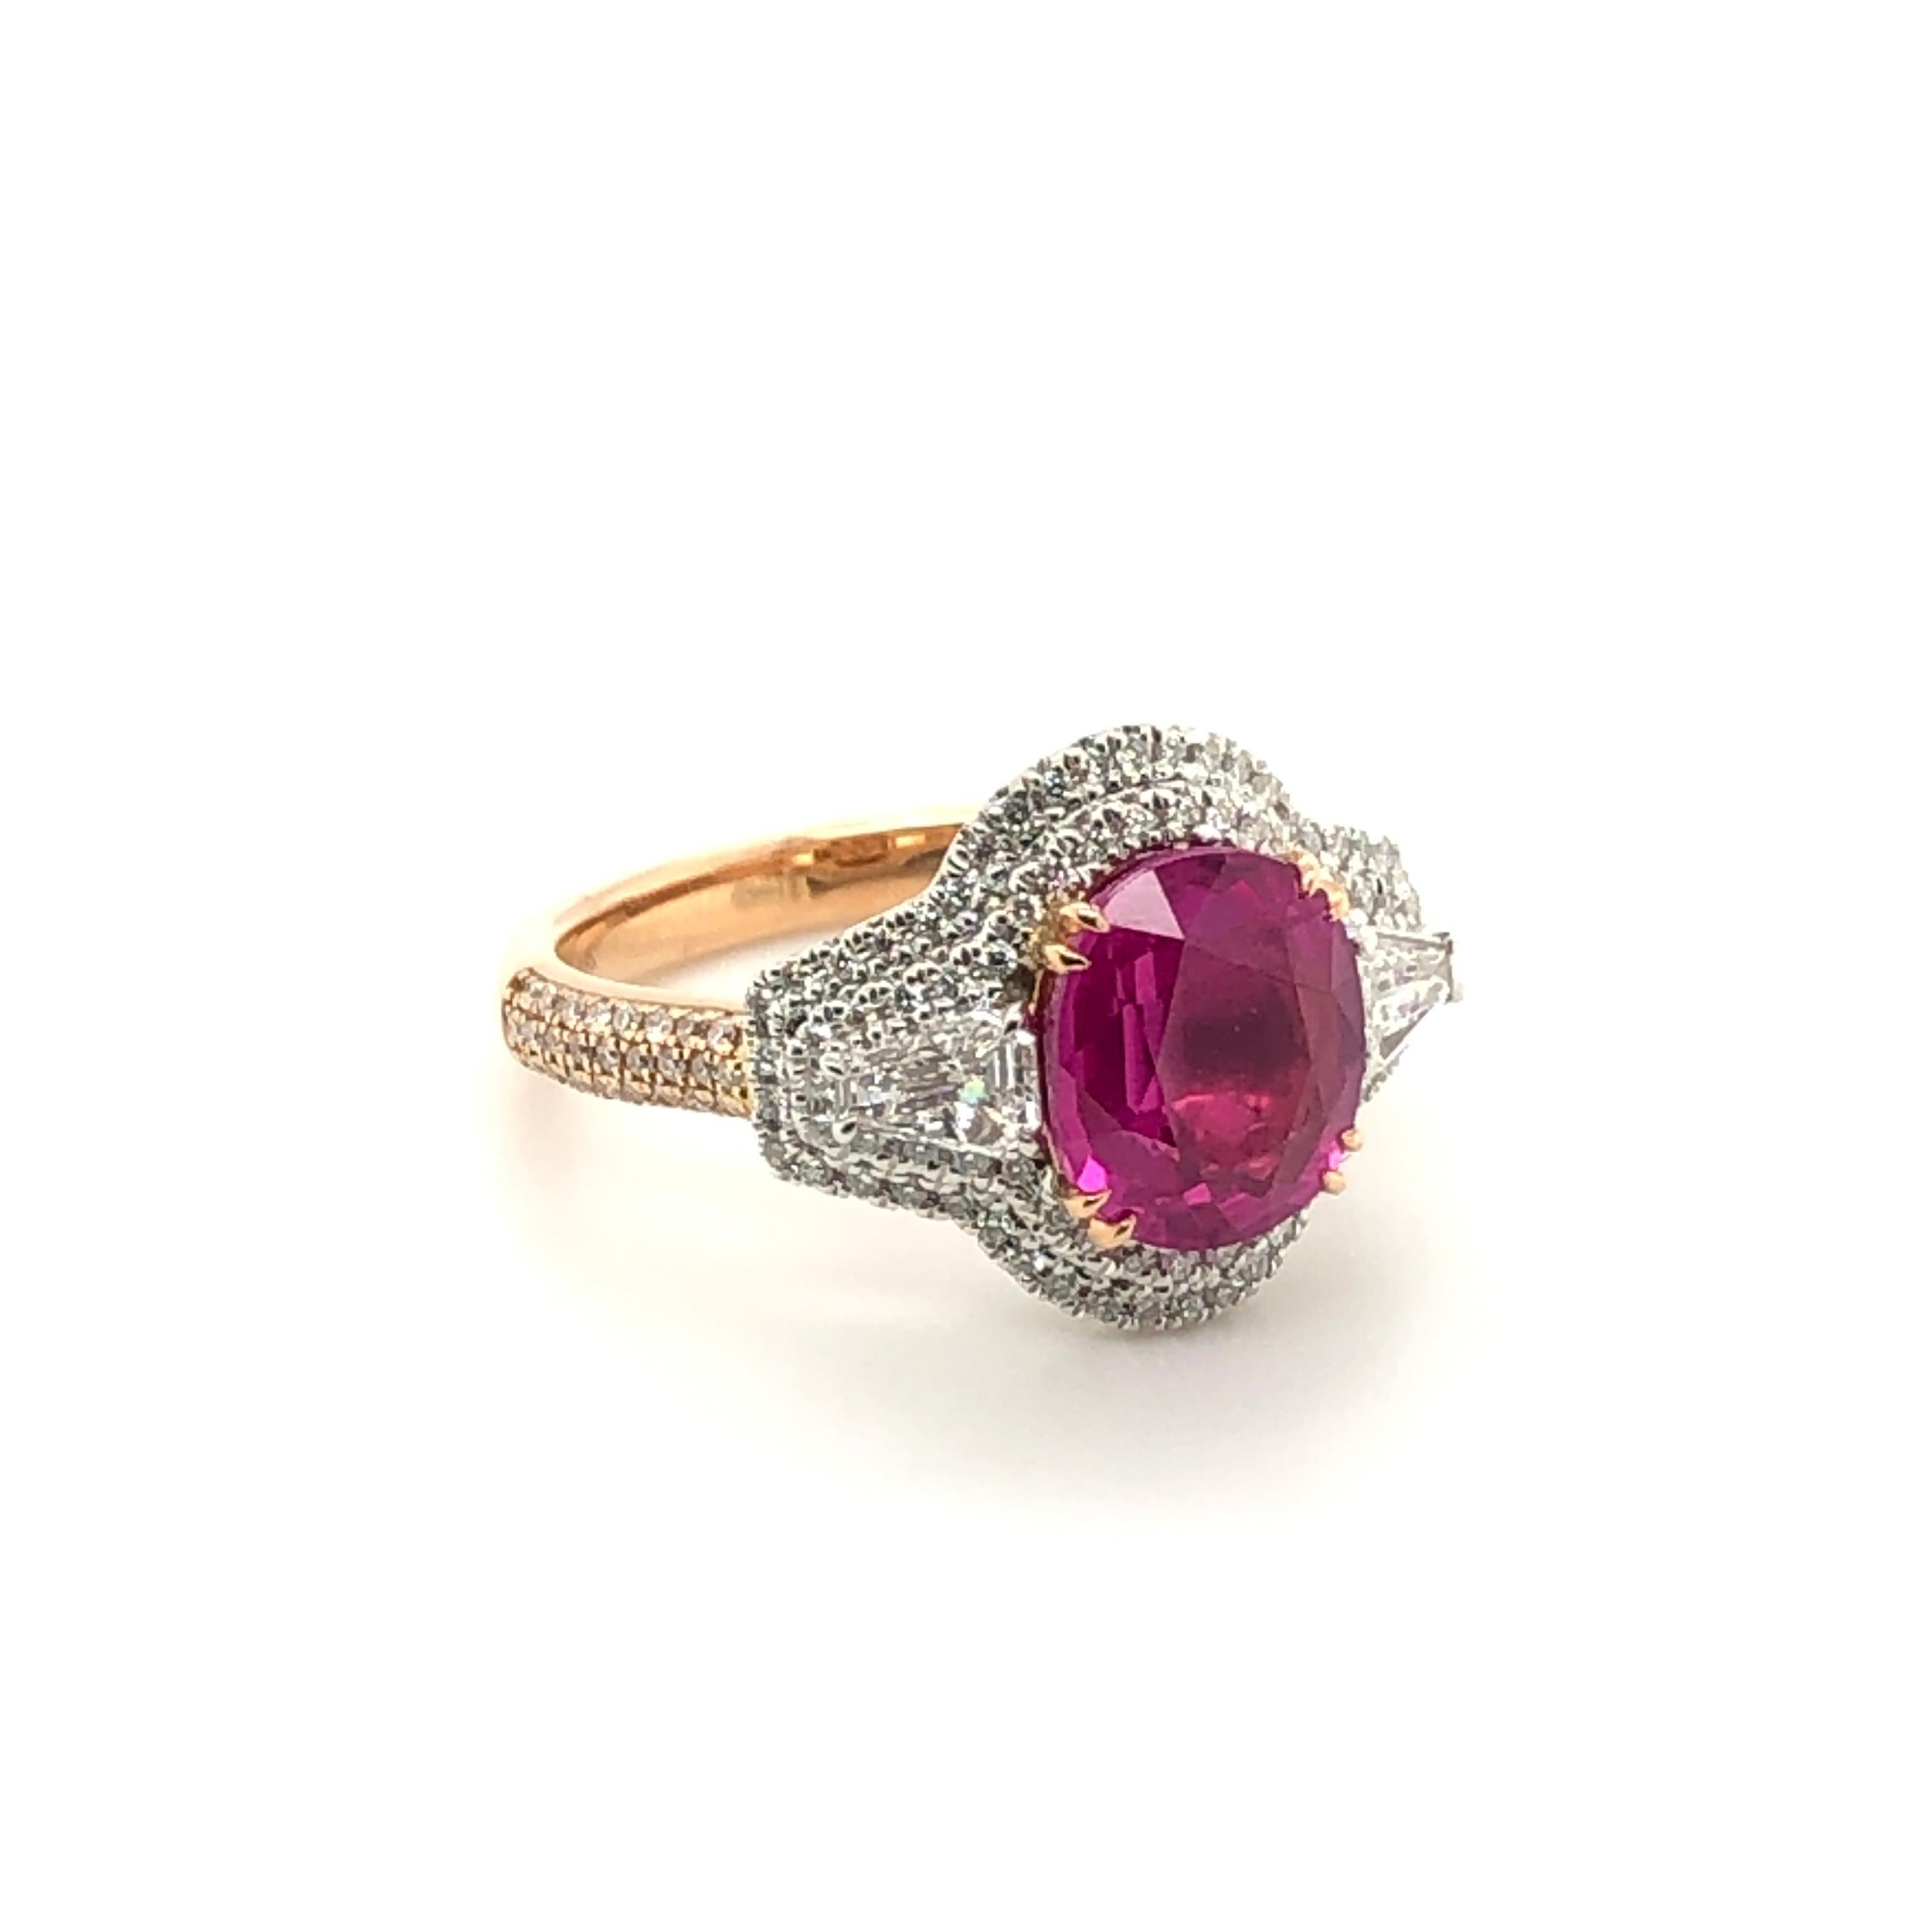 Your passion for precious gems is revealed in this stunning high profile design from Le Vian Couture.  The Platinum and 18K Two-Tone Gold ring is centered with an oval cut 3-3/8 carat Passion Ruby sided with two trapezoid cut Vanilla Diamonds with